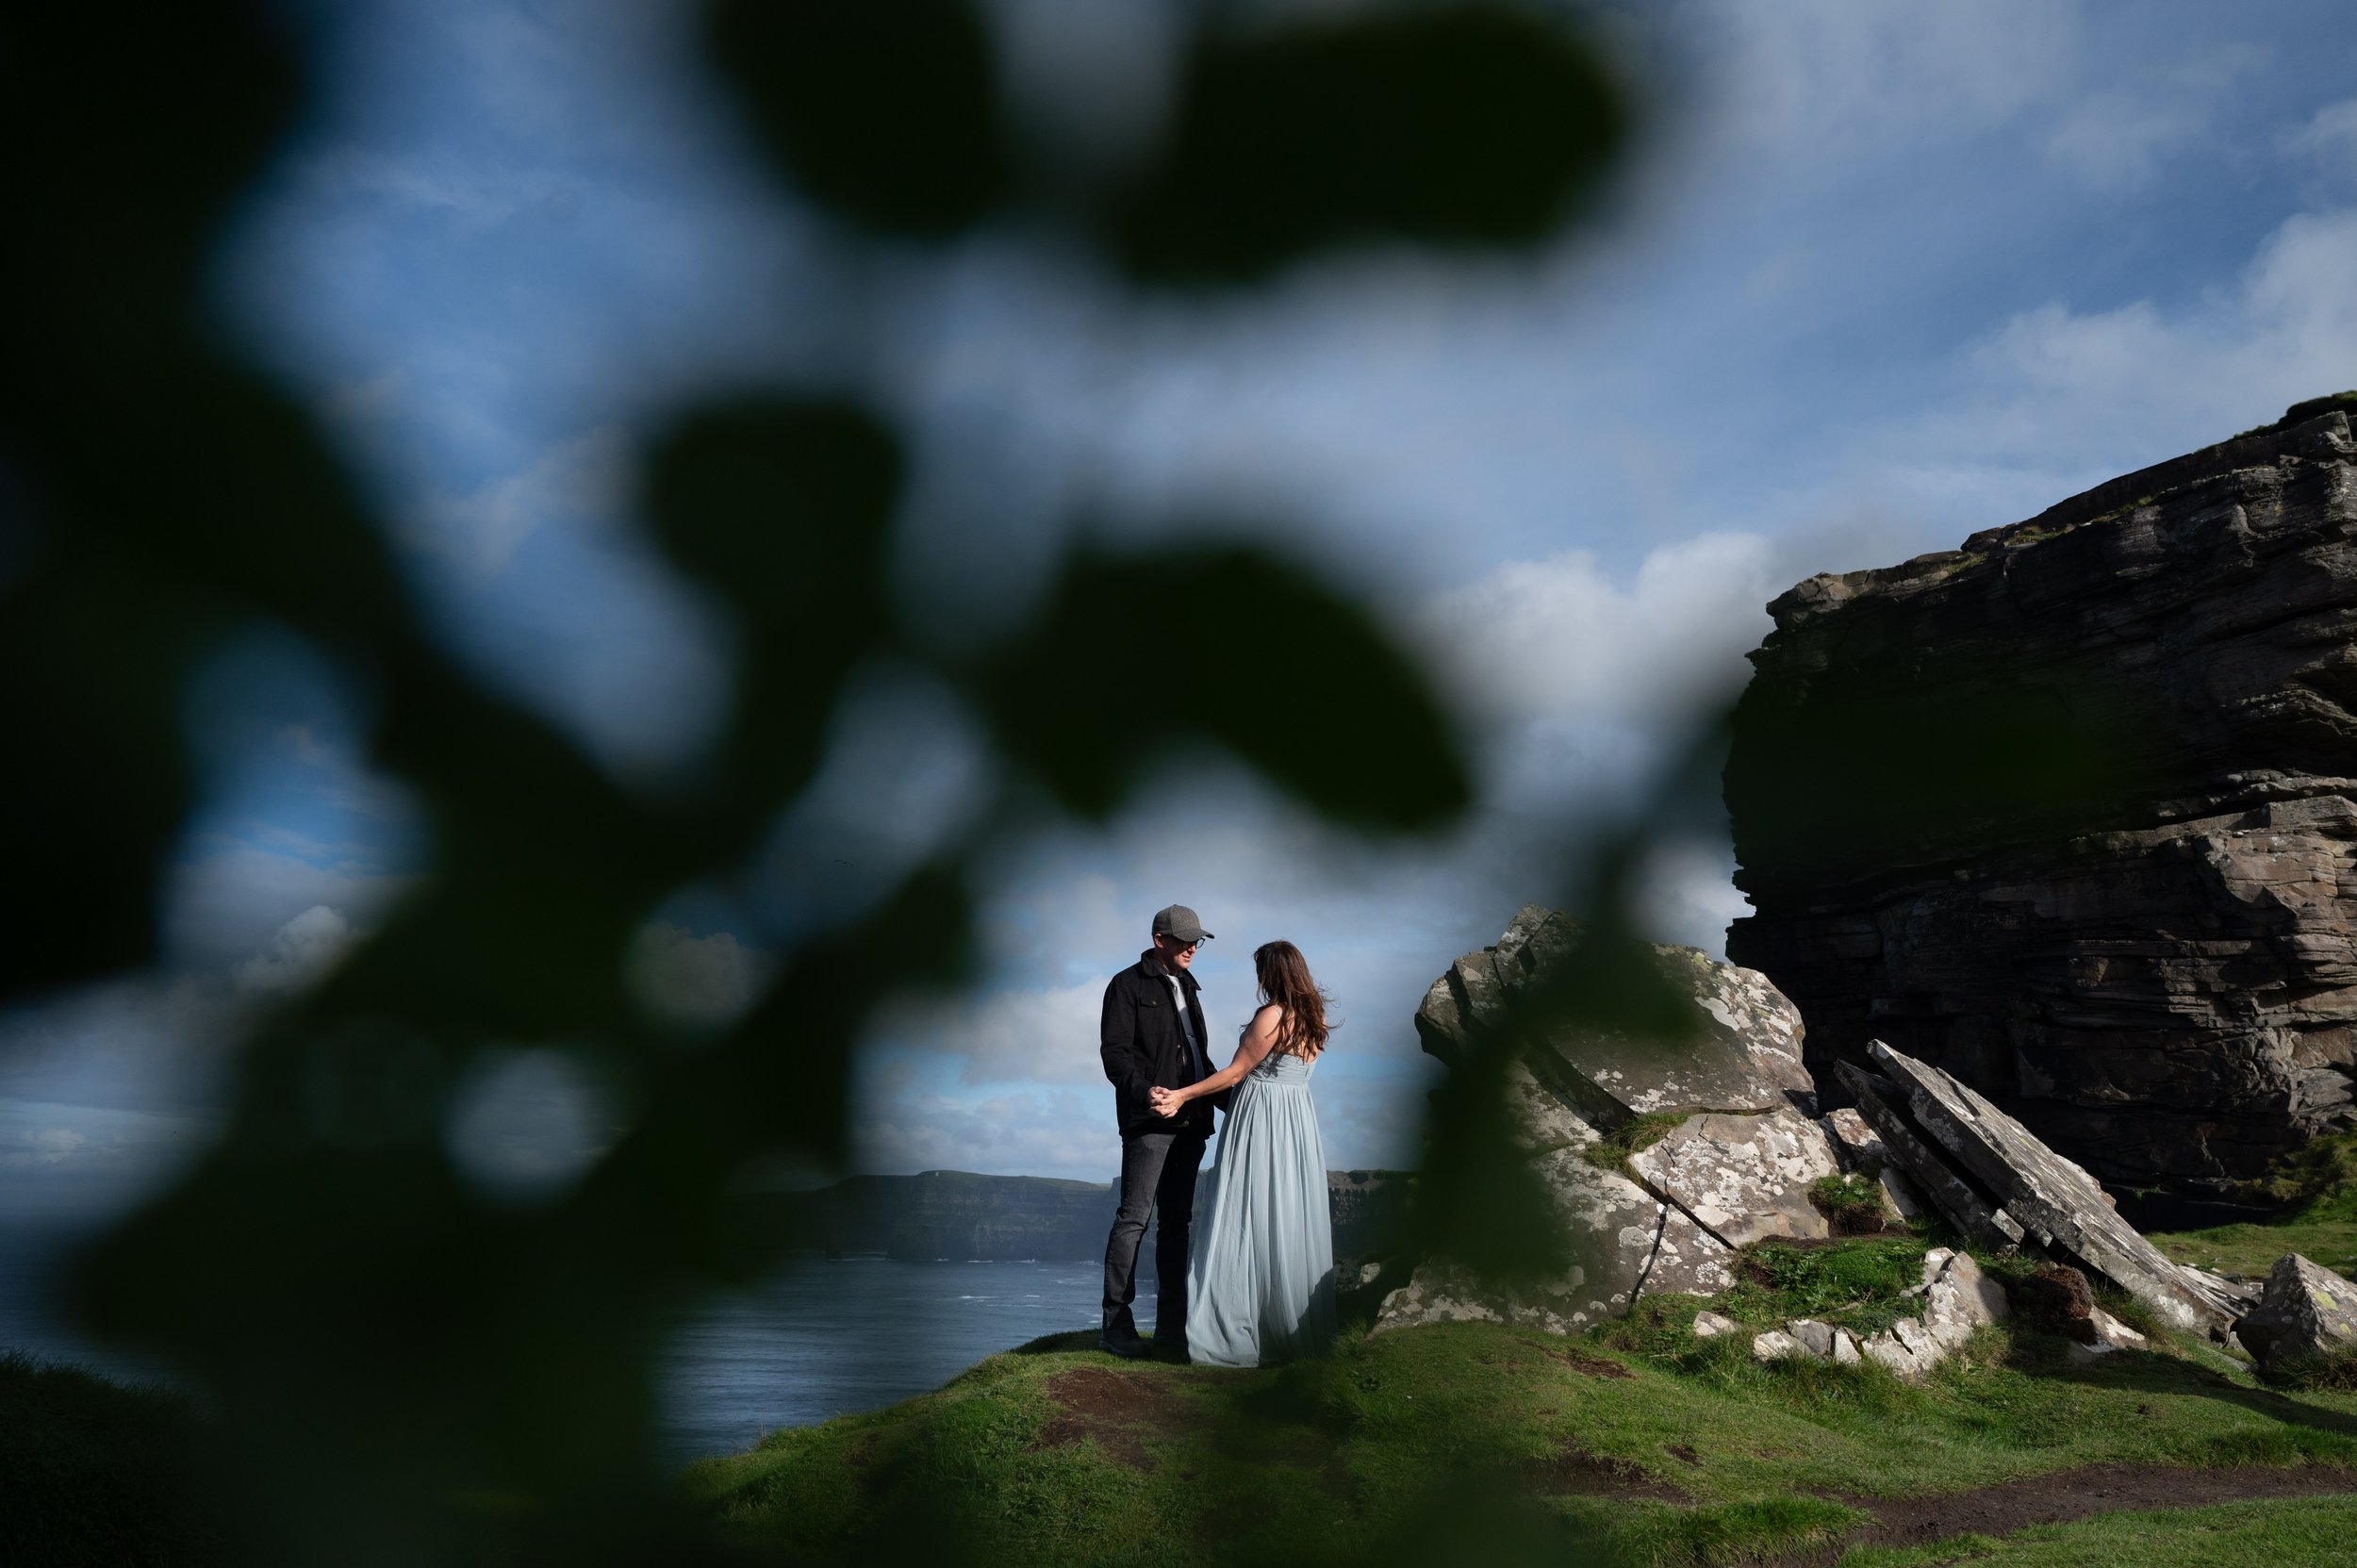 Marie O'Mahony photographer Cliffs of Moher anniversary couples photo session through leaves